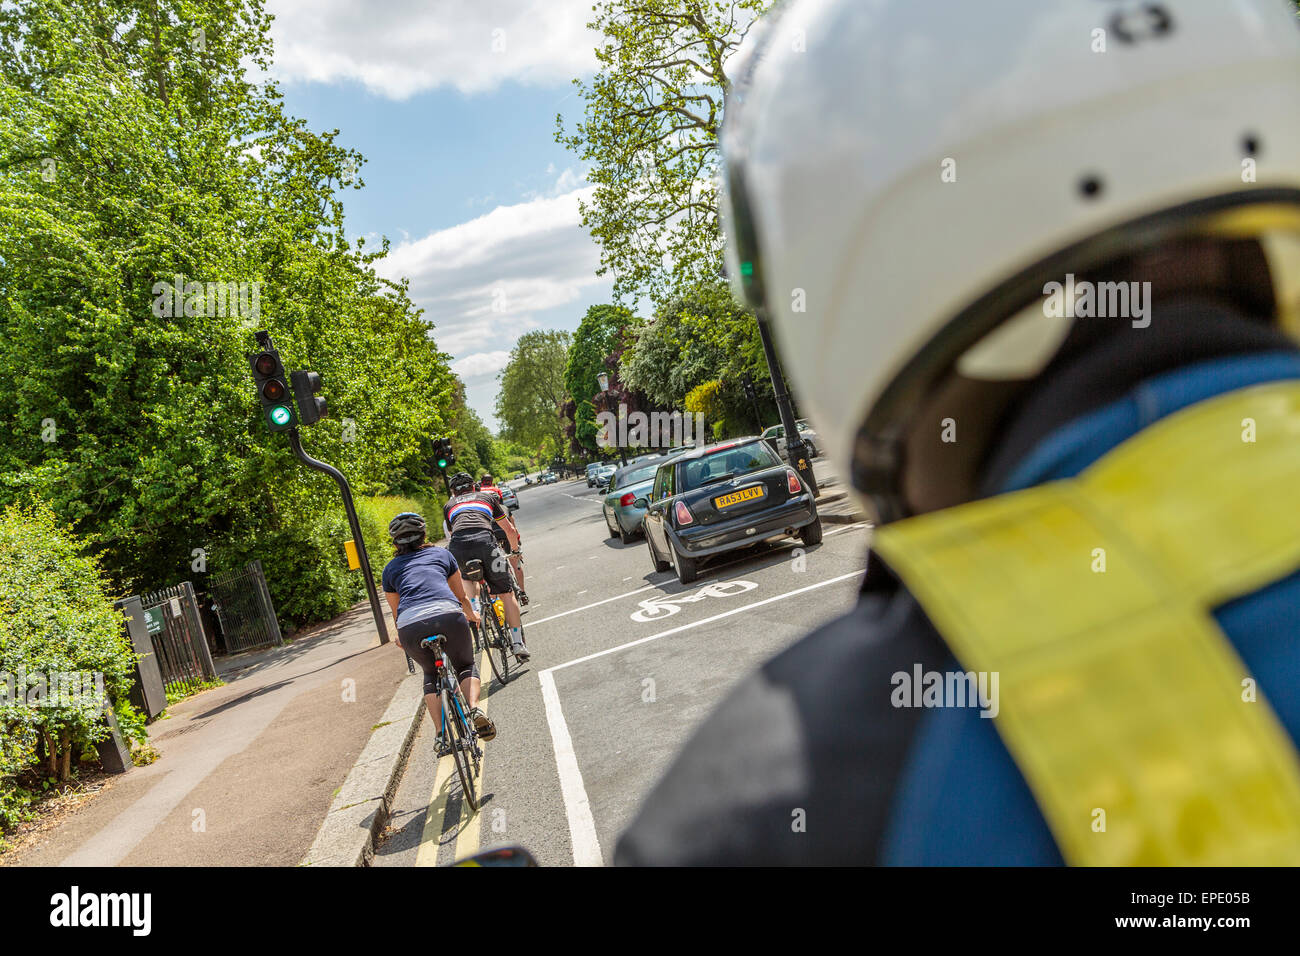 Advanced Motorcyclist negotiating hazards, other road users, as they present themselves during rush hour in Regents Park London England UK Stock Photo